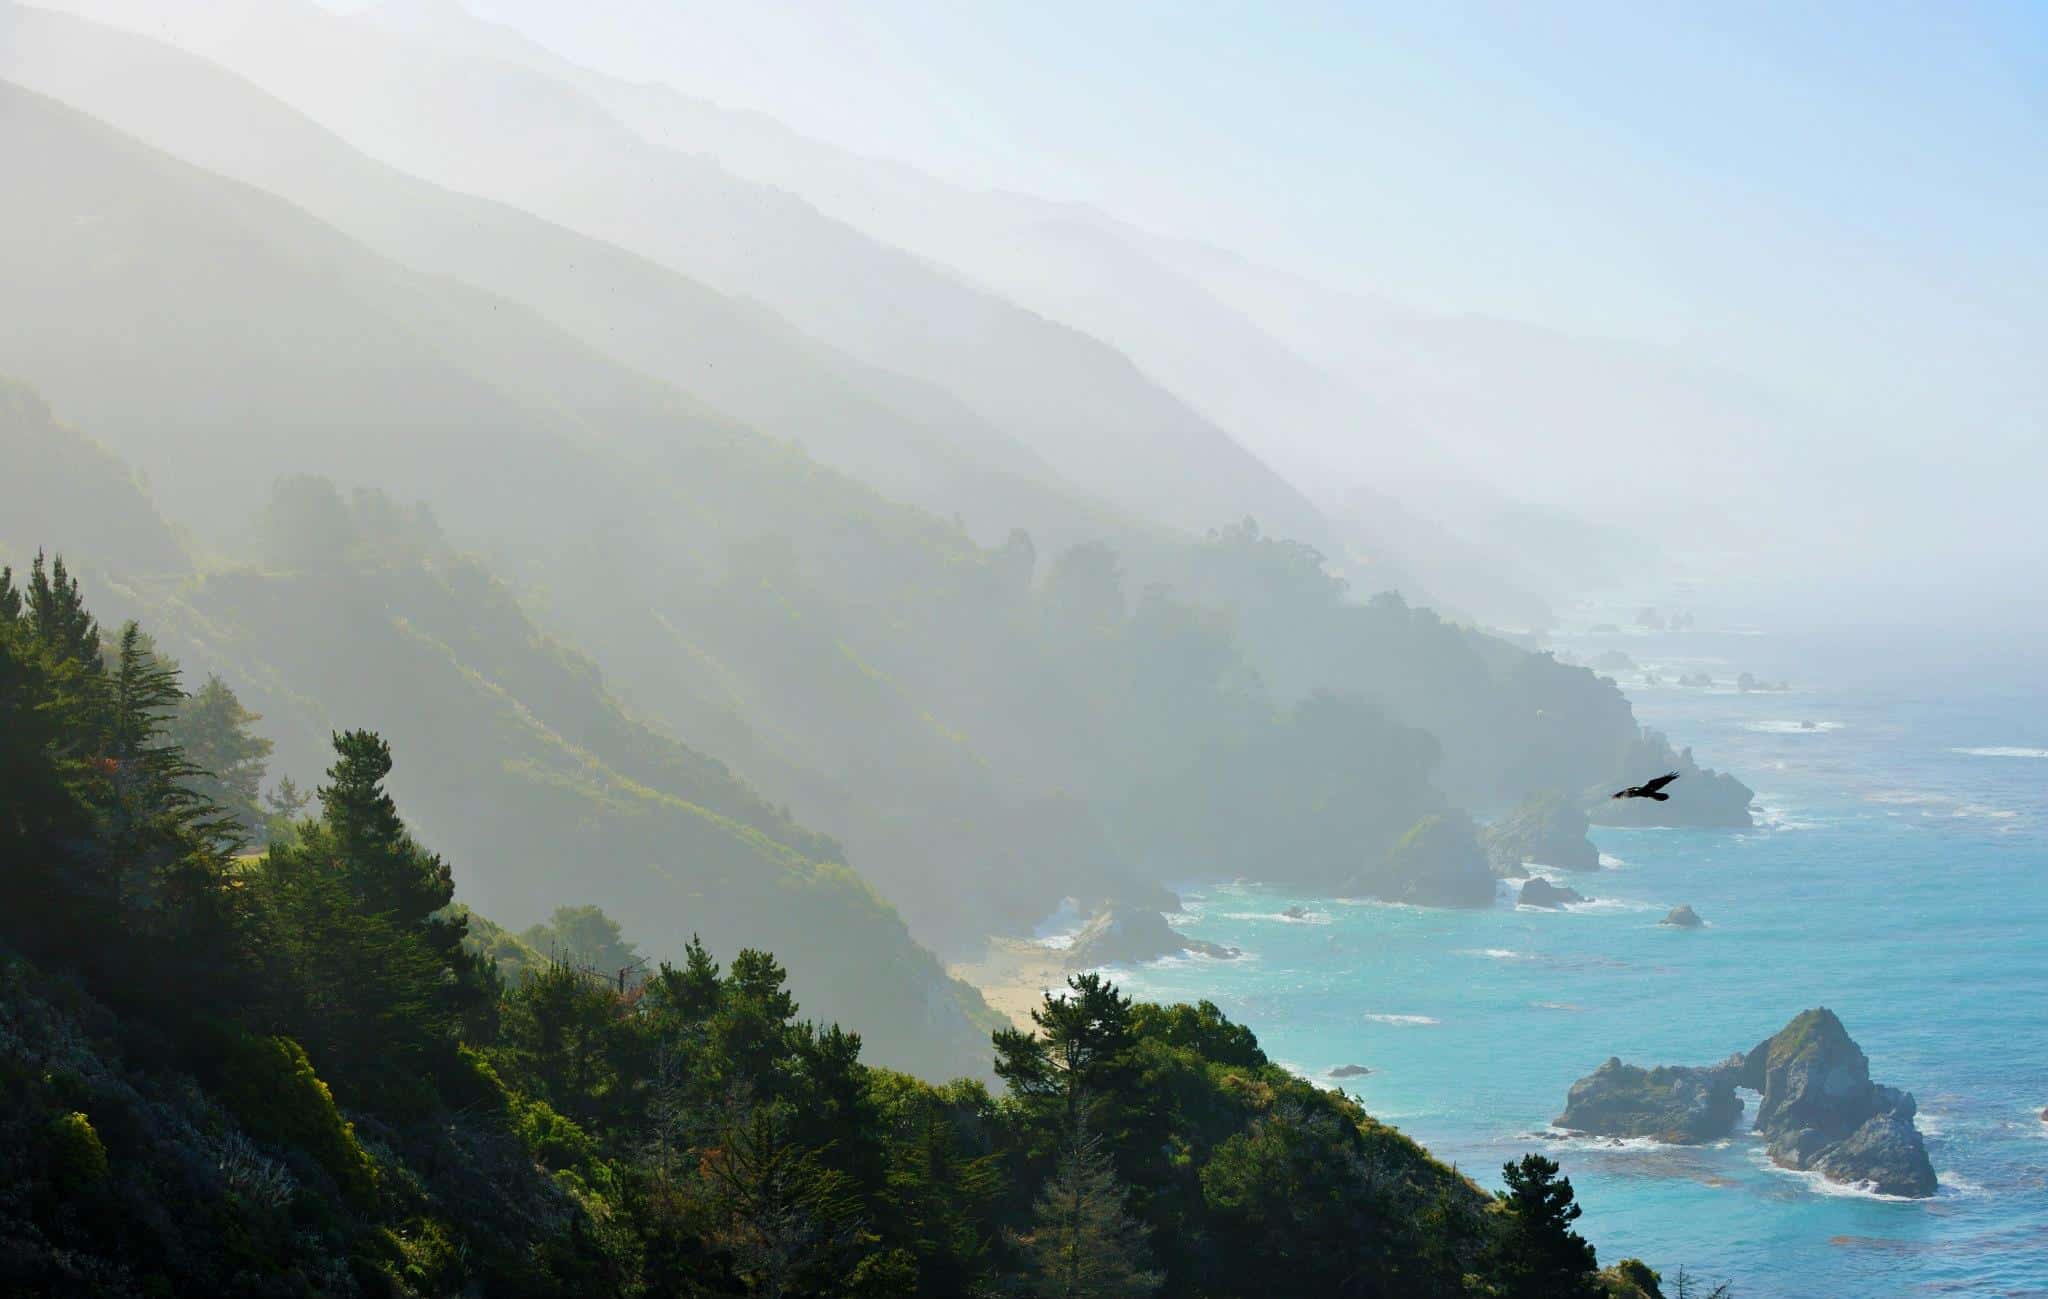 A serene view of a misty coastline with layers of rugged cliffs descending into a tranquil sea, as a bird soars over the picturesque landscape.